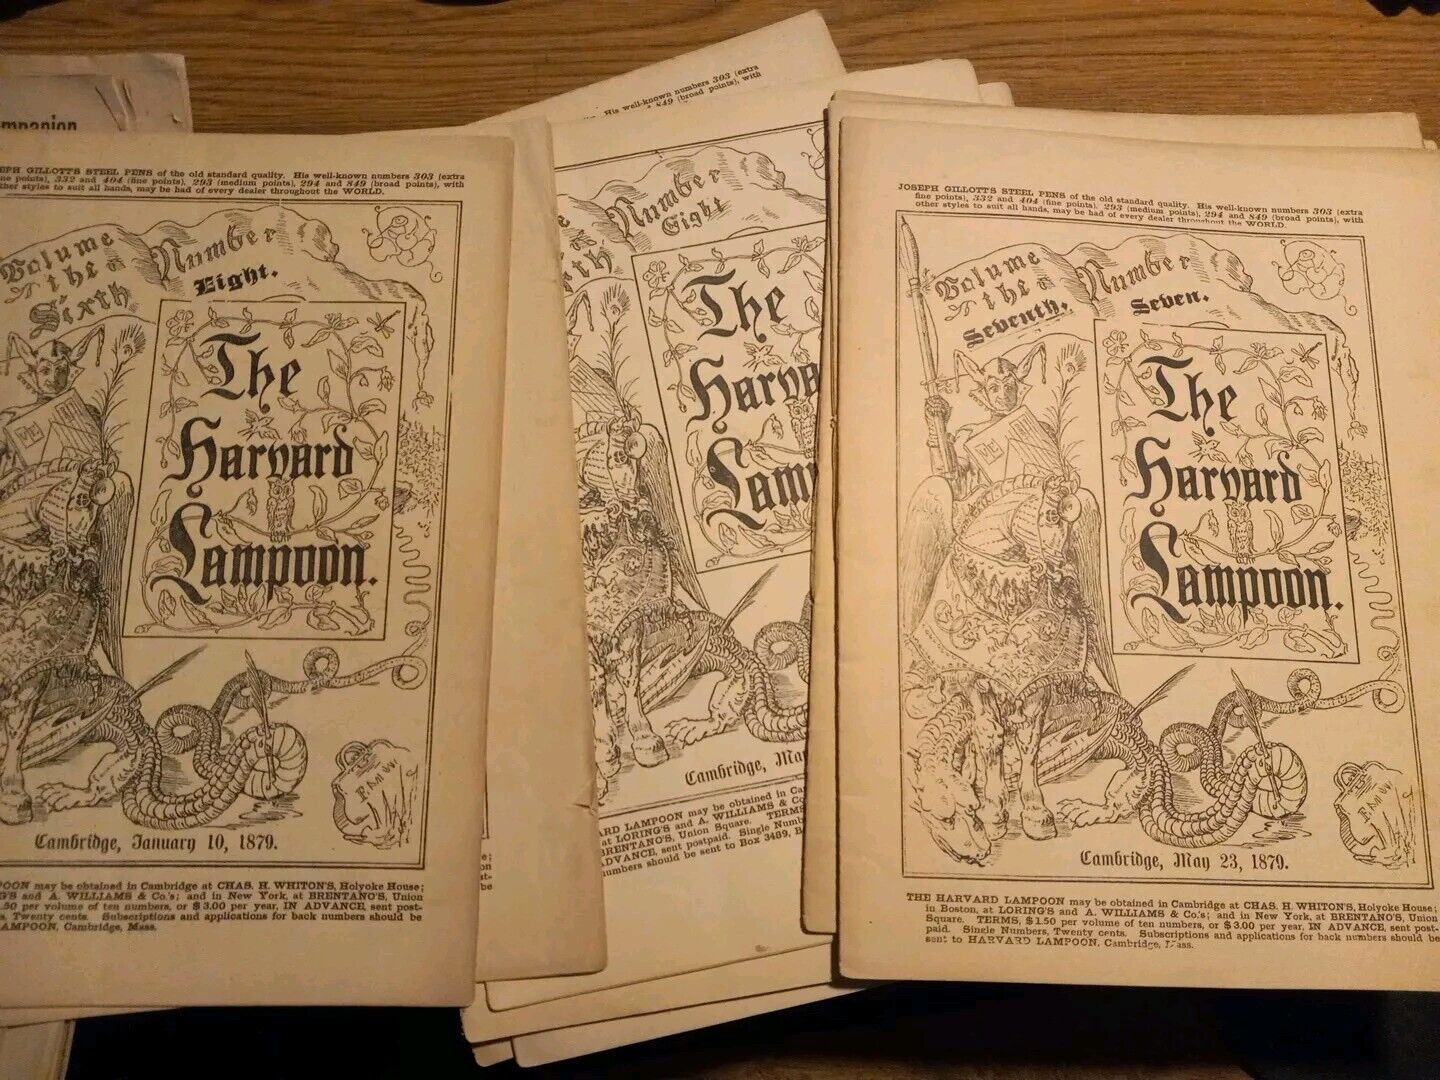 Extremely RARE original issues 1877-1880 Harvard Lampoon 13 total